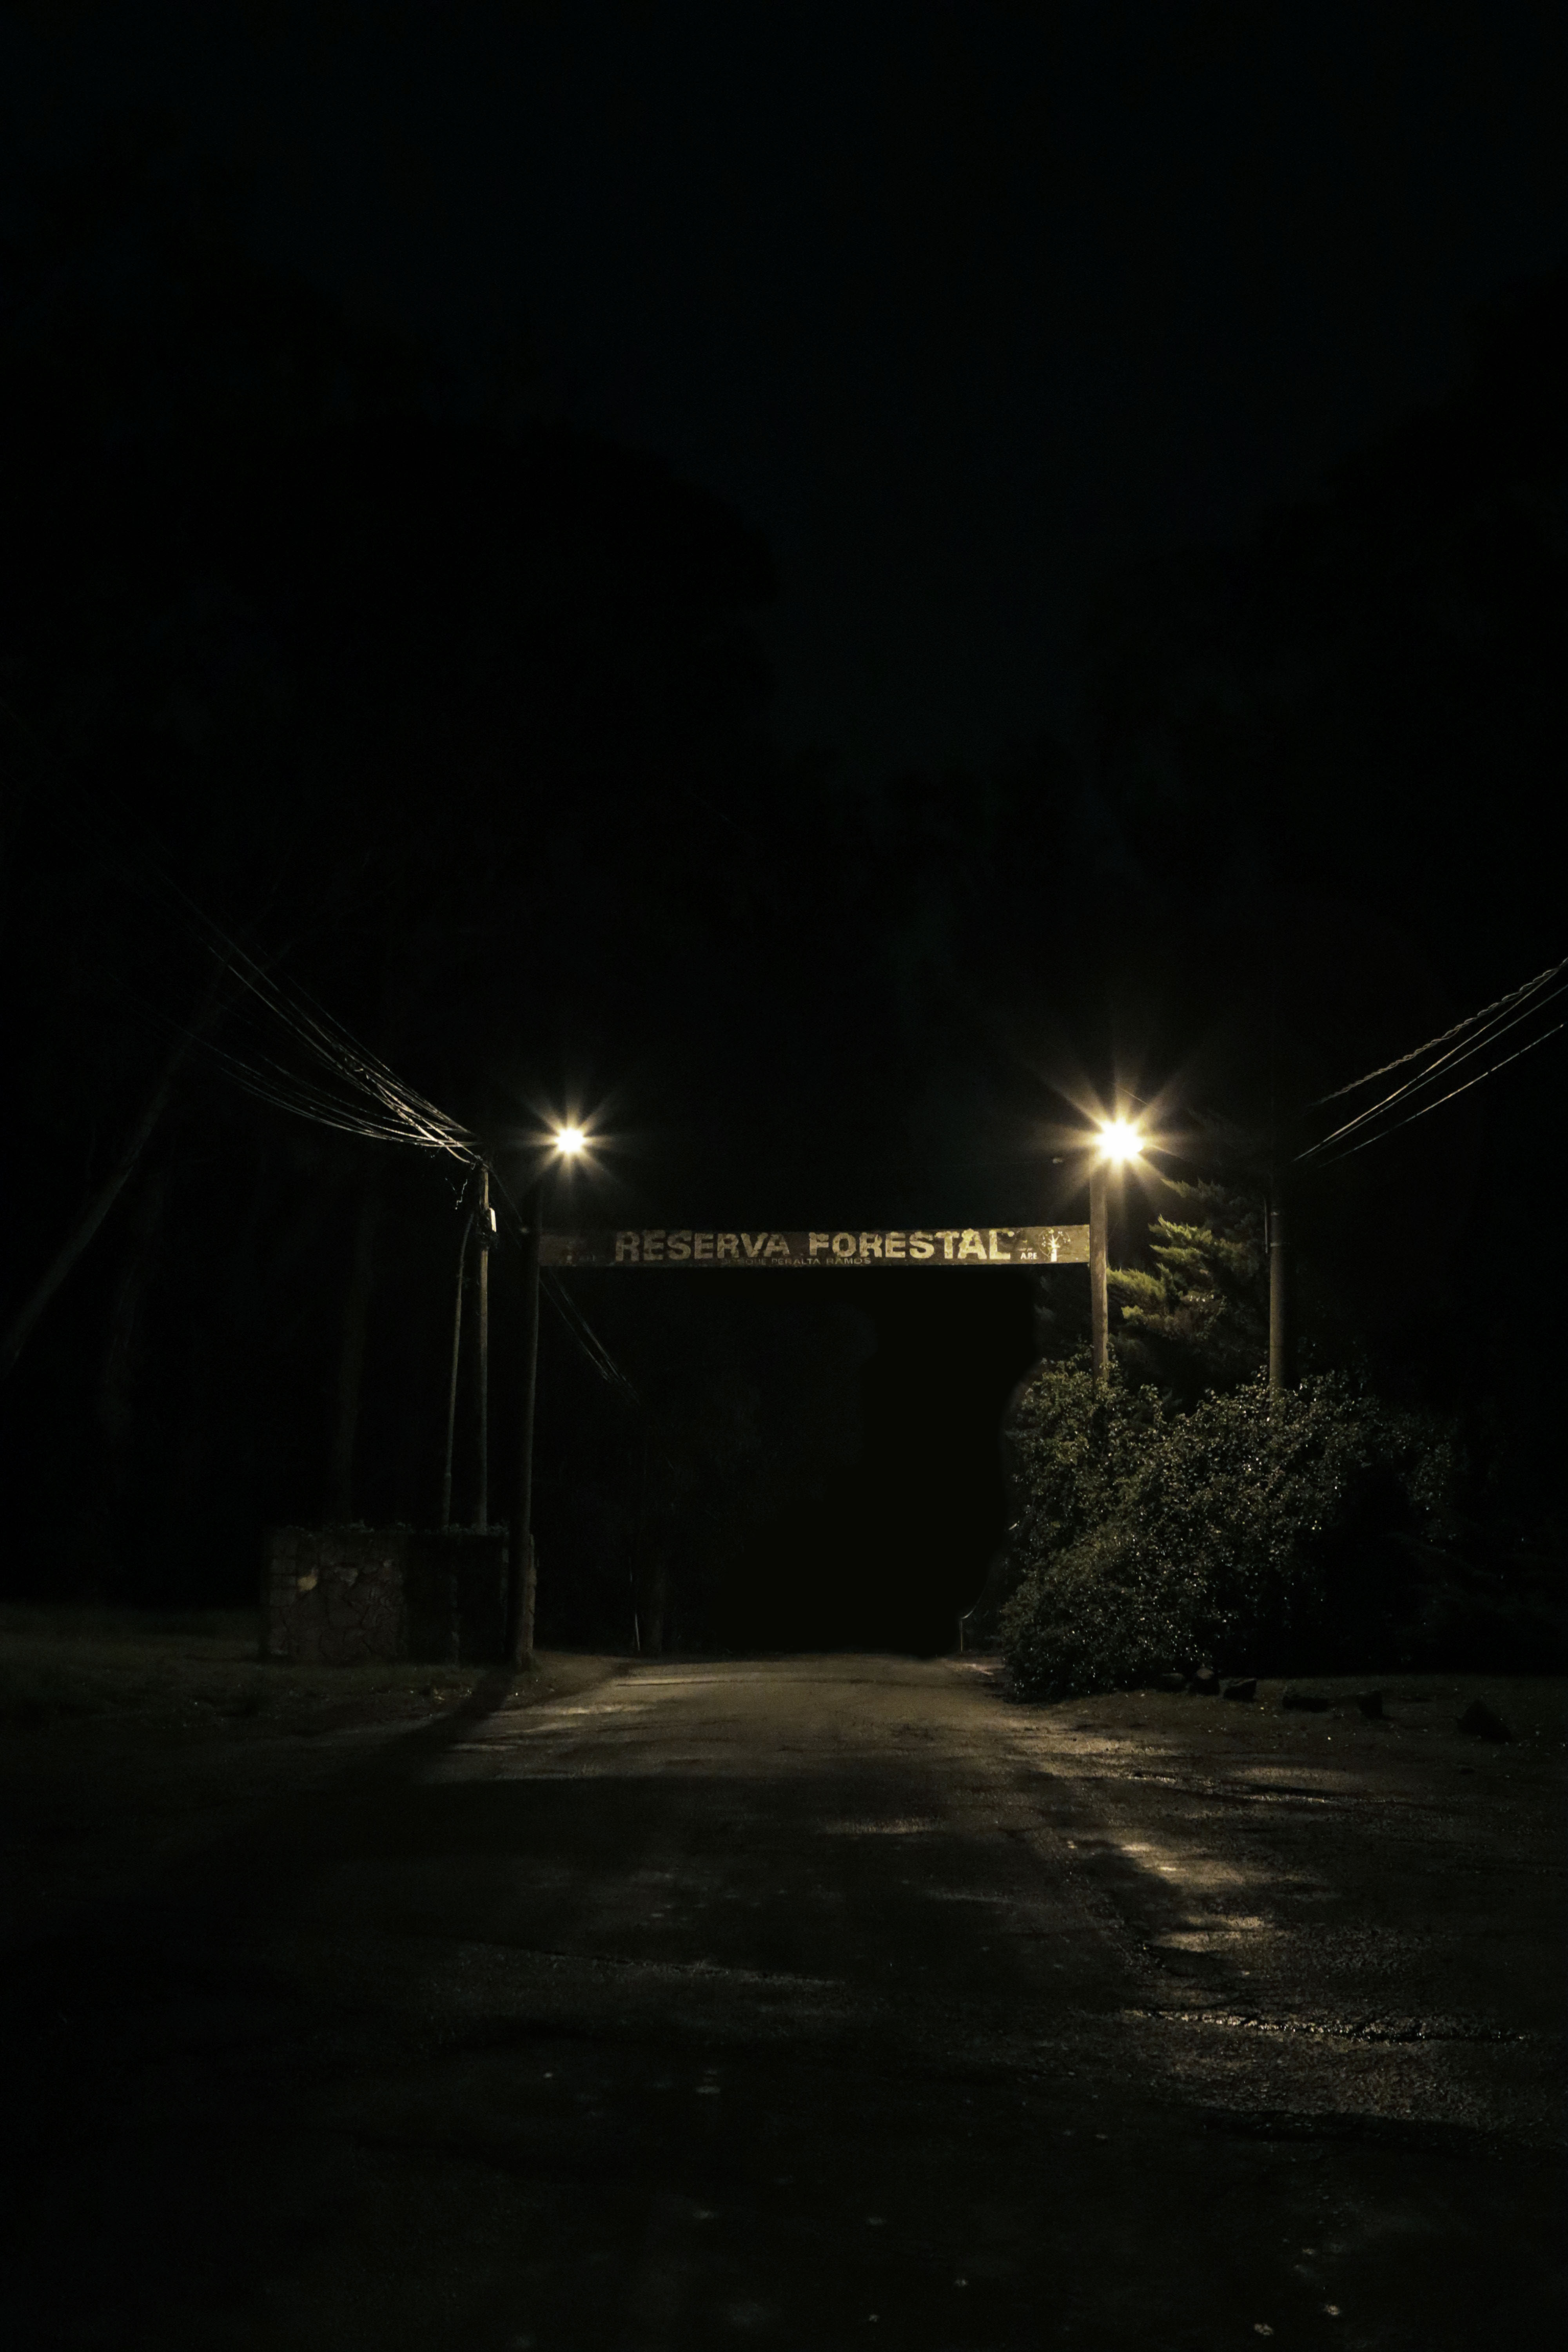 A dark photograph at night of a sign reading "Reserva Forestal"